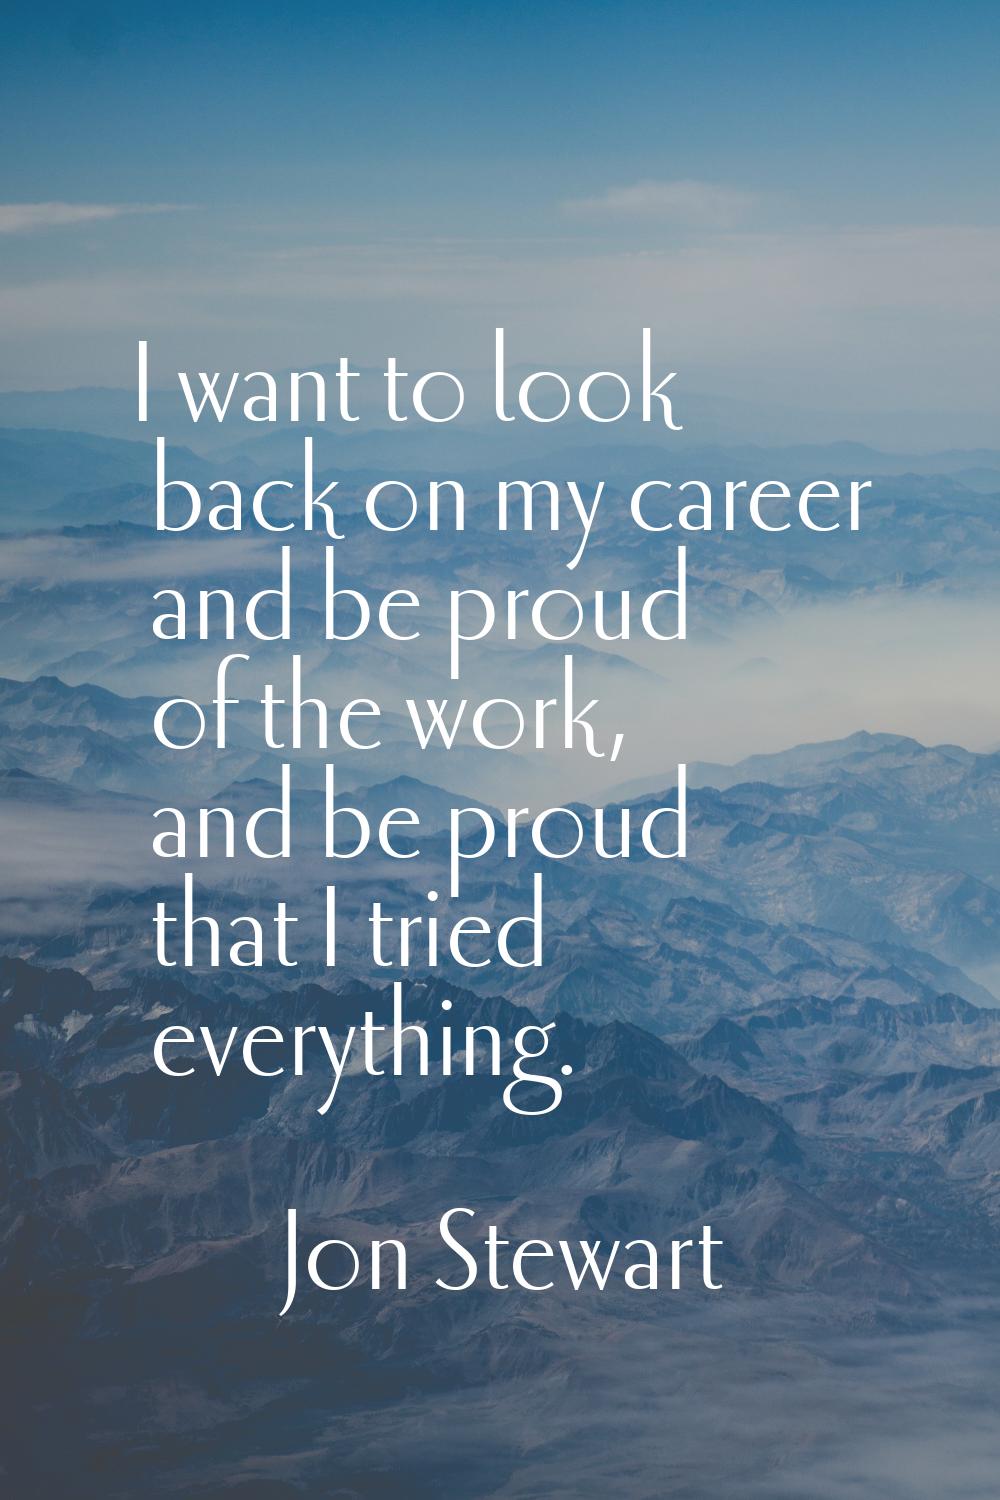 I want to look back on my career and be proud of the work, and be proud that I tried everything.